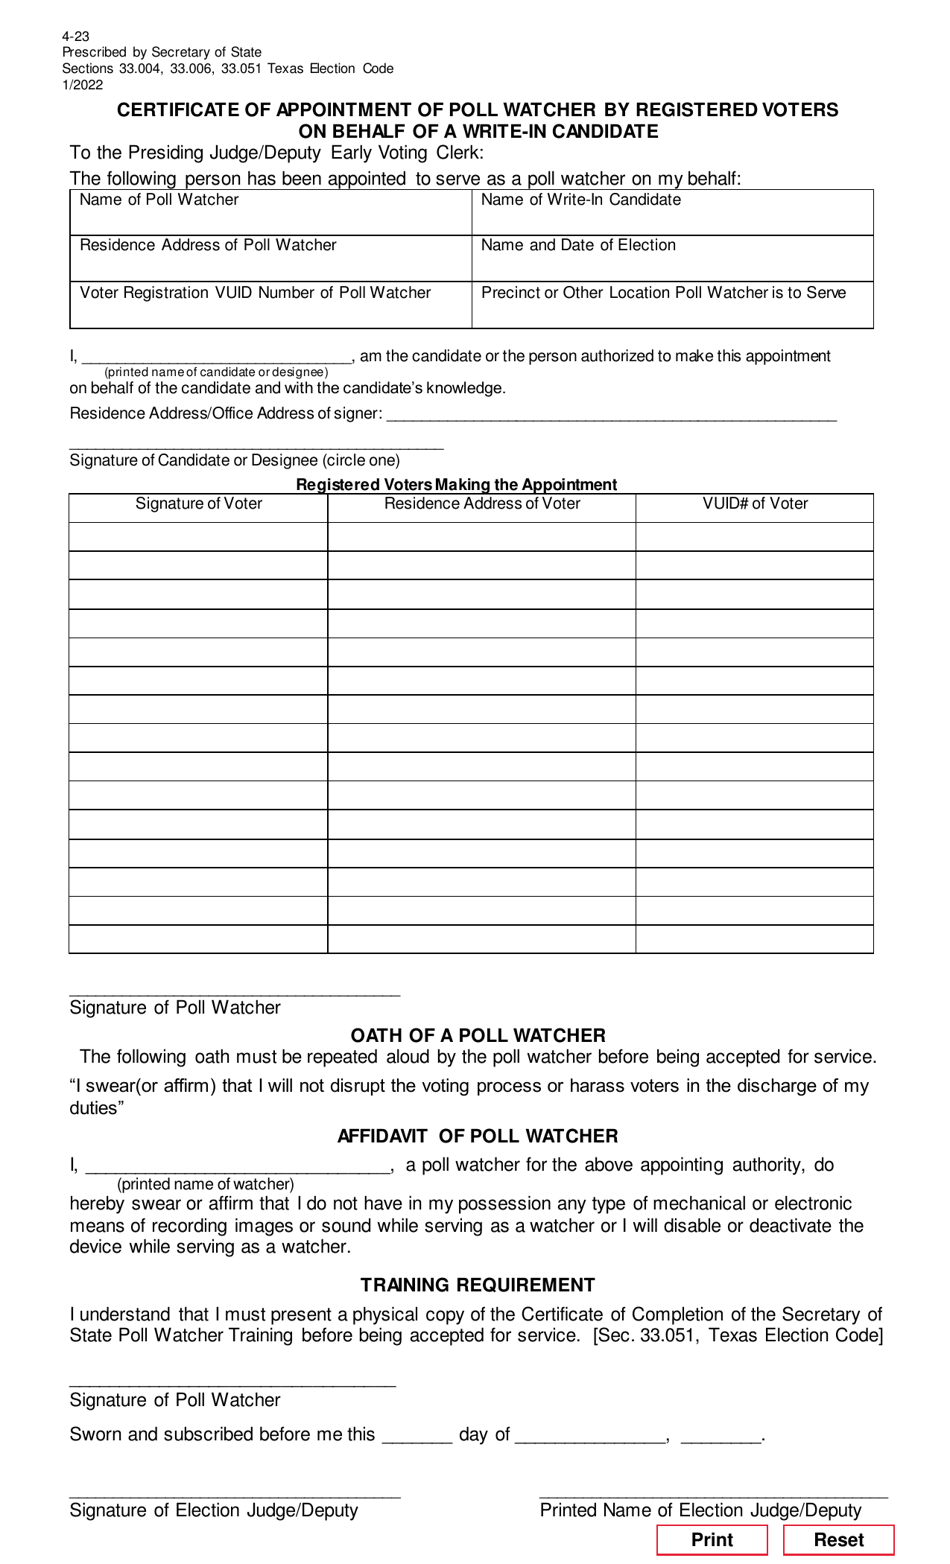 Form 4-23 Certificate of Appointment of Poll Watcher by Registered Voters on Behalf of a Write-In Candidate - Texas, Page 1